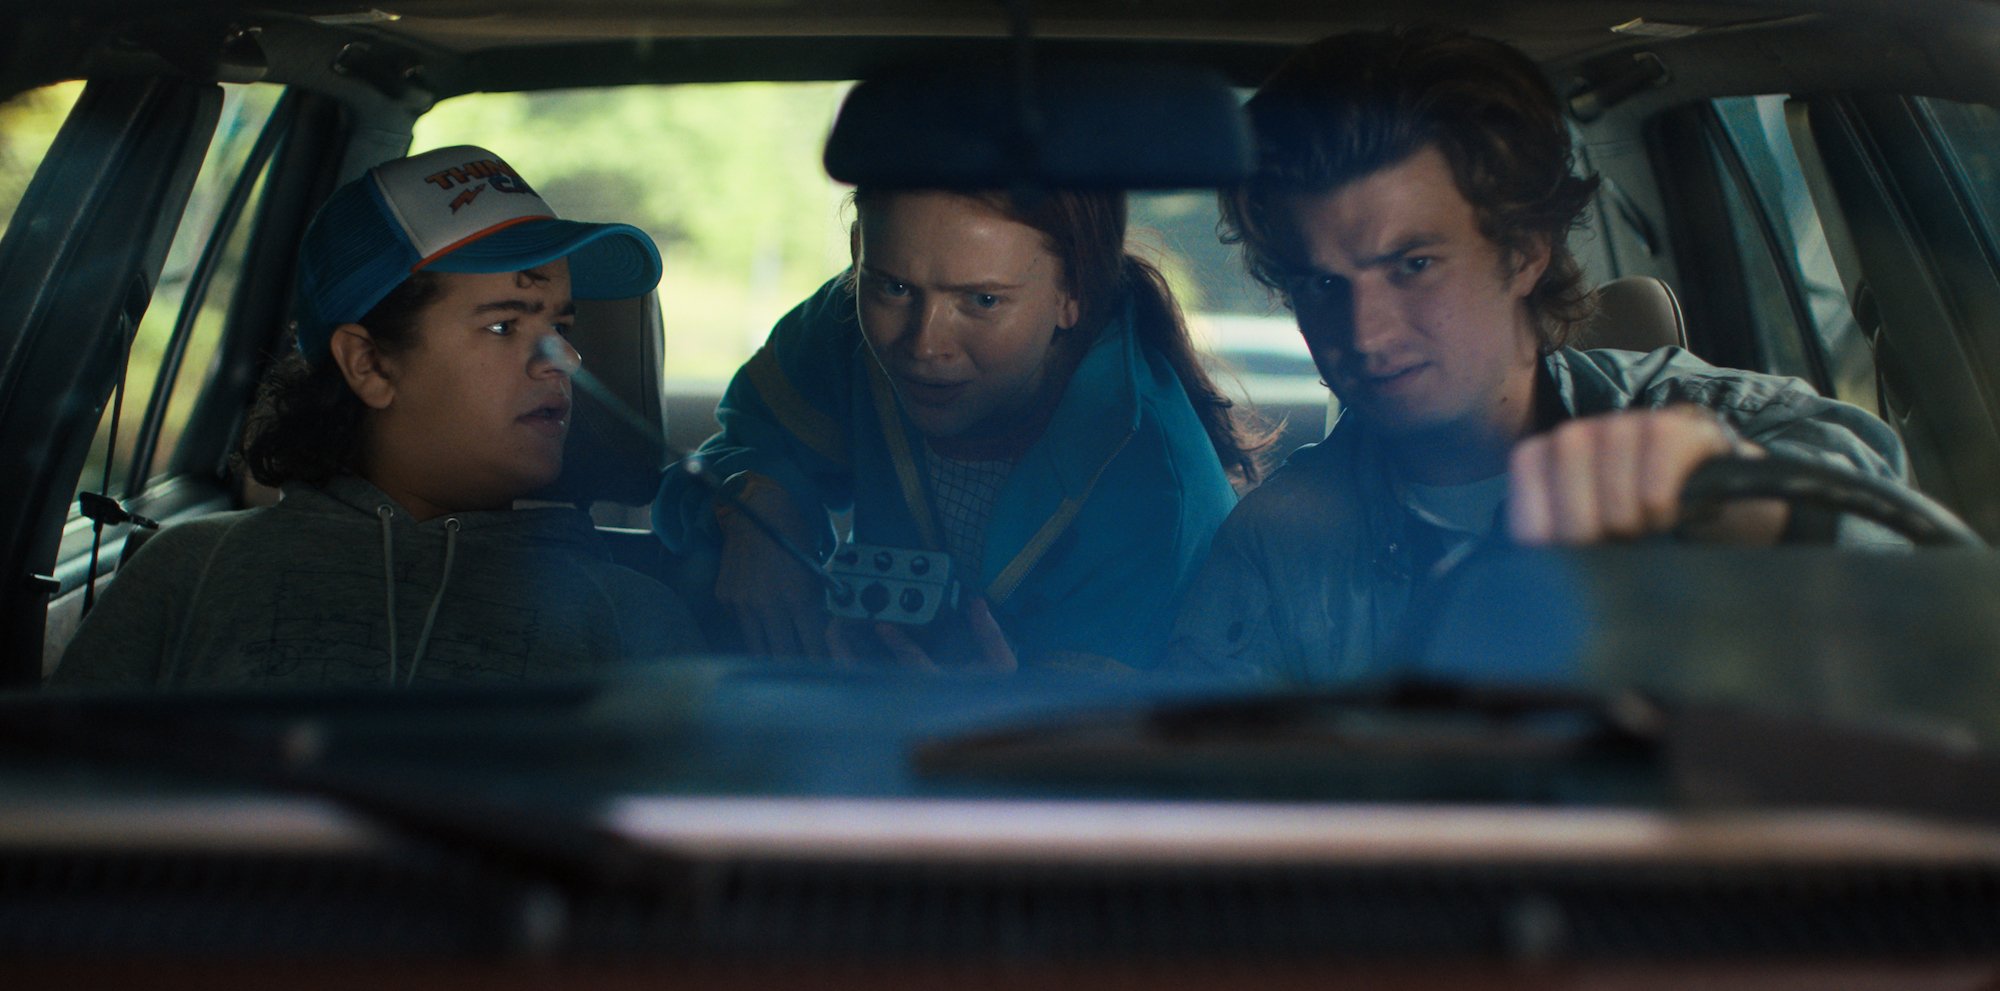 Gaten Matarazzo, Sadie Sink, and Joe Keery sit in a car in a production still from 'Stranger Things' Season 4. What time will Netflix release the new episodes?